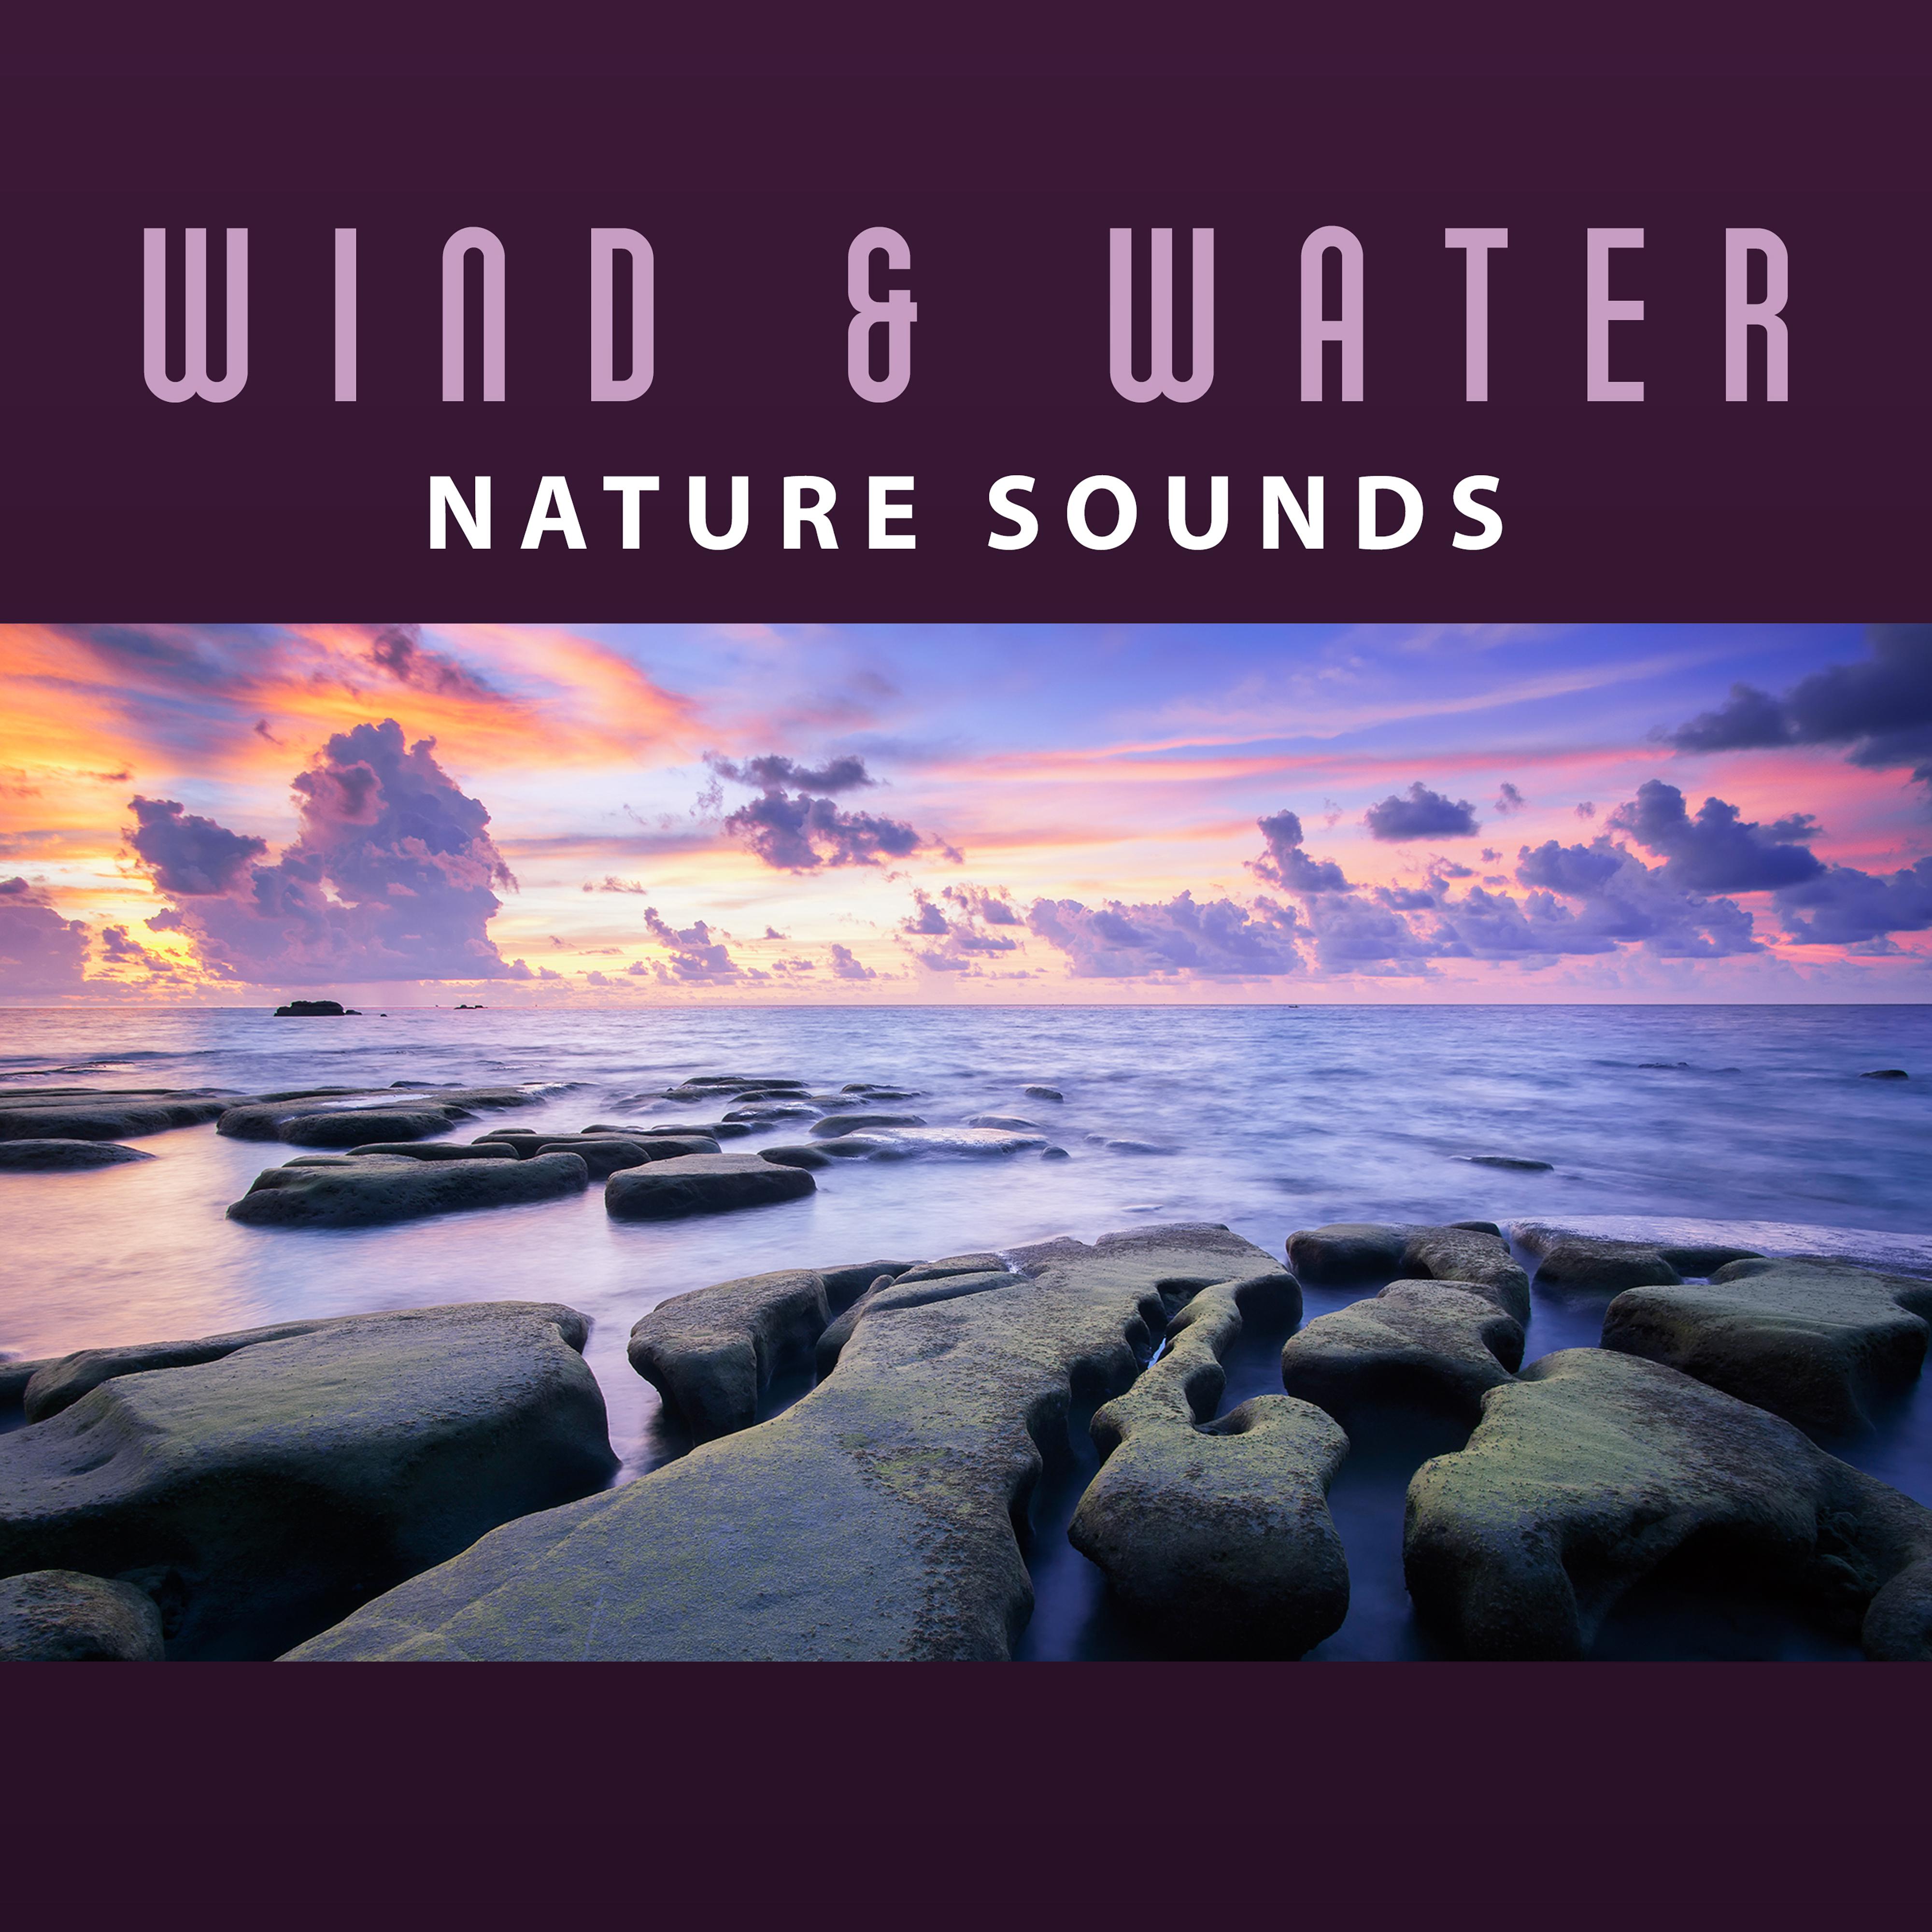 Wind  Water Nature Sounds  Relaxing Music, Nature Music, Meditation, Relax, Instrumental New Age